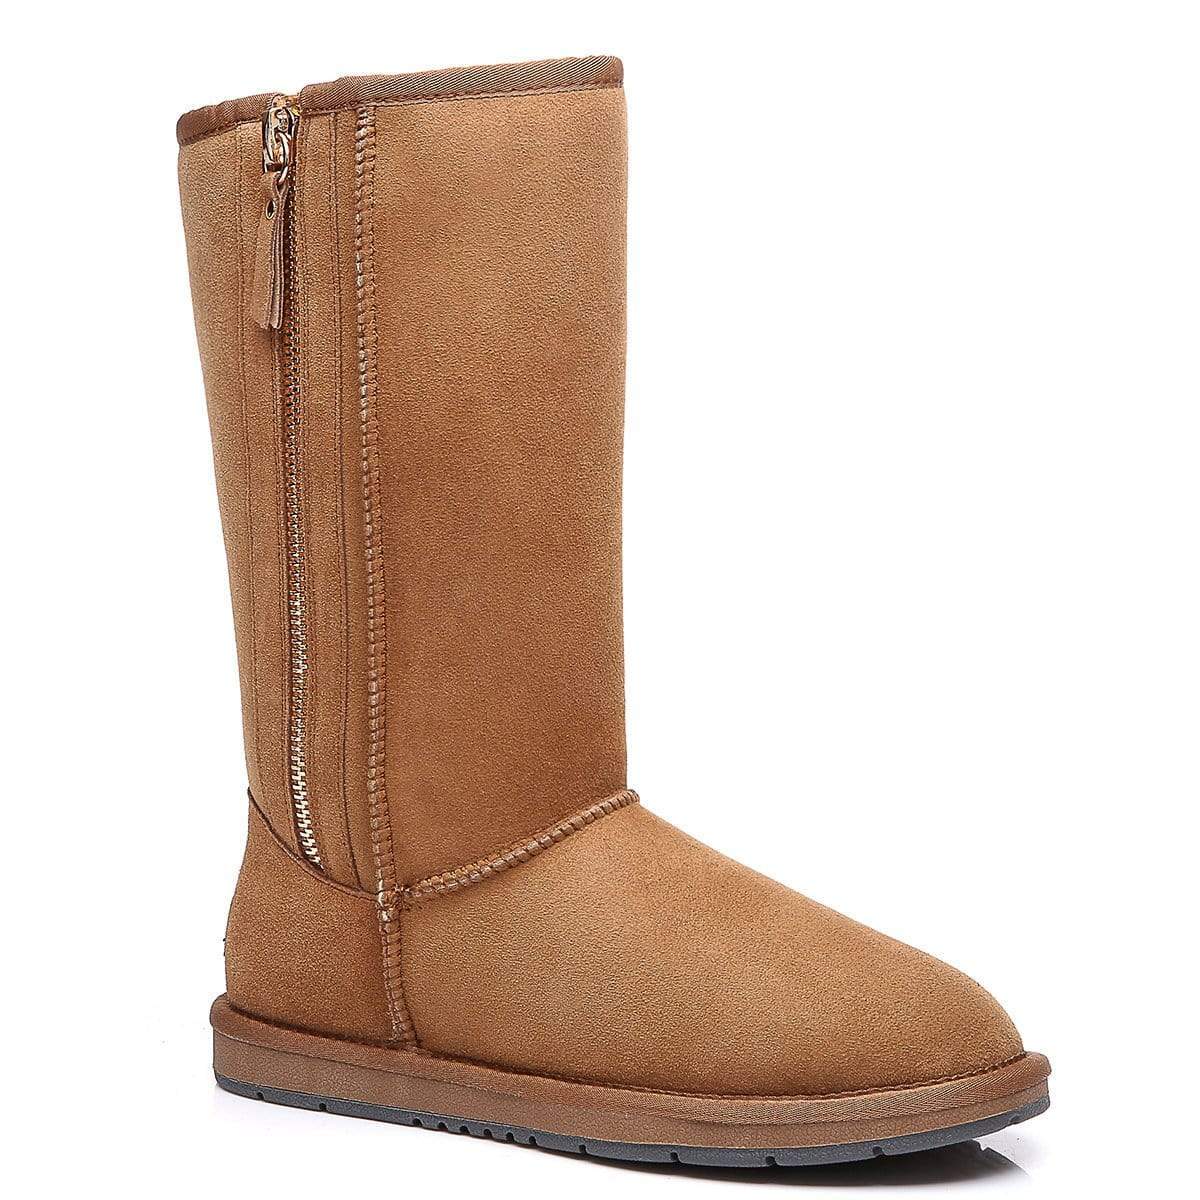 UGG Direct - Tall Side Zip